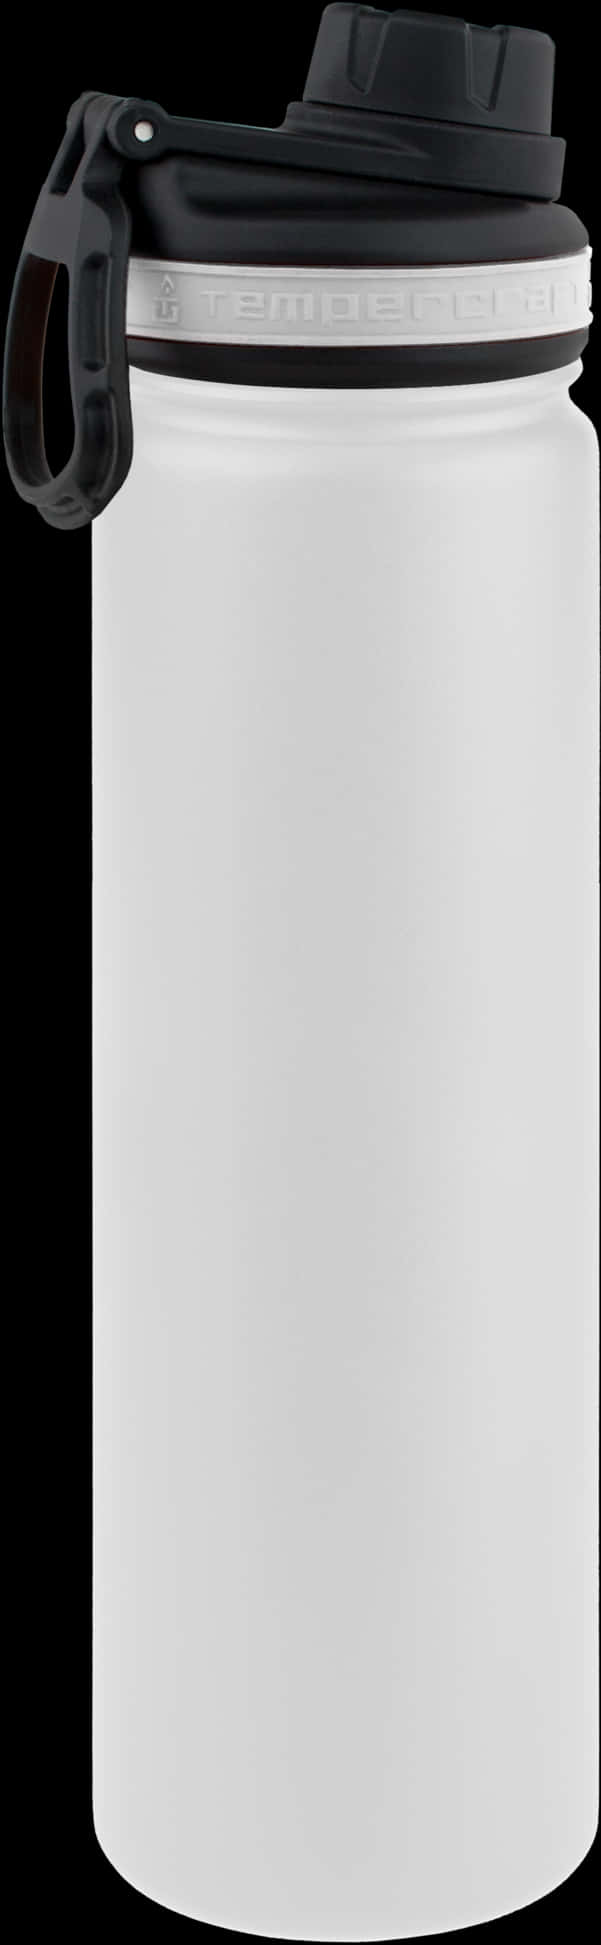 A White Cylinder With A Black Background